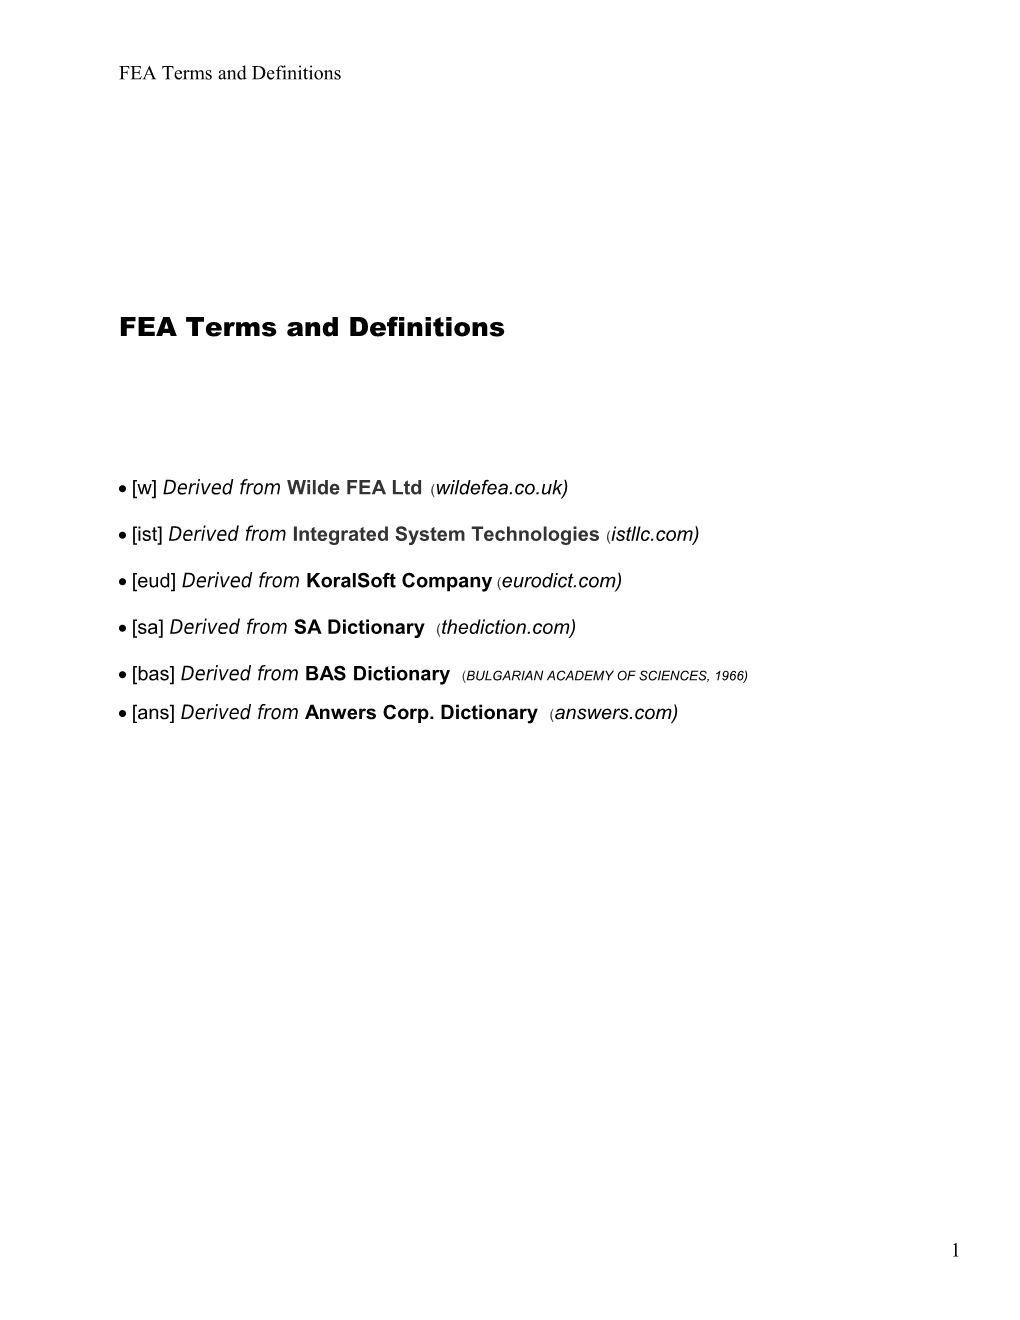 FEA Terms and Definitions s1